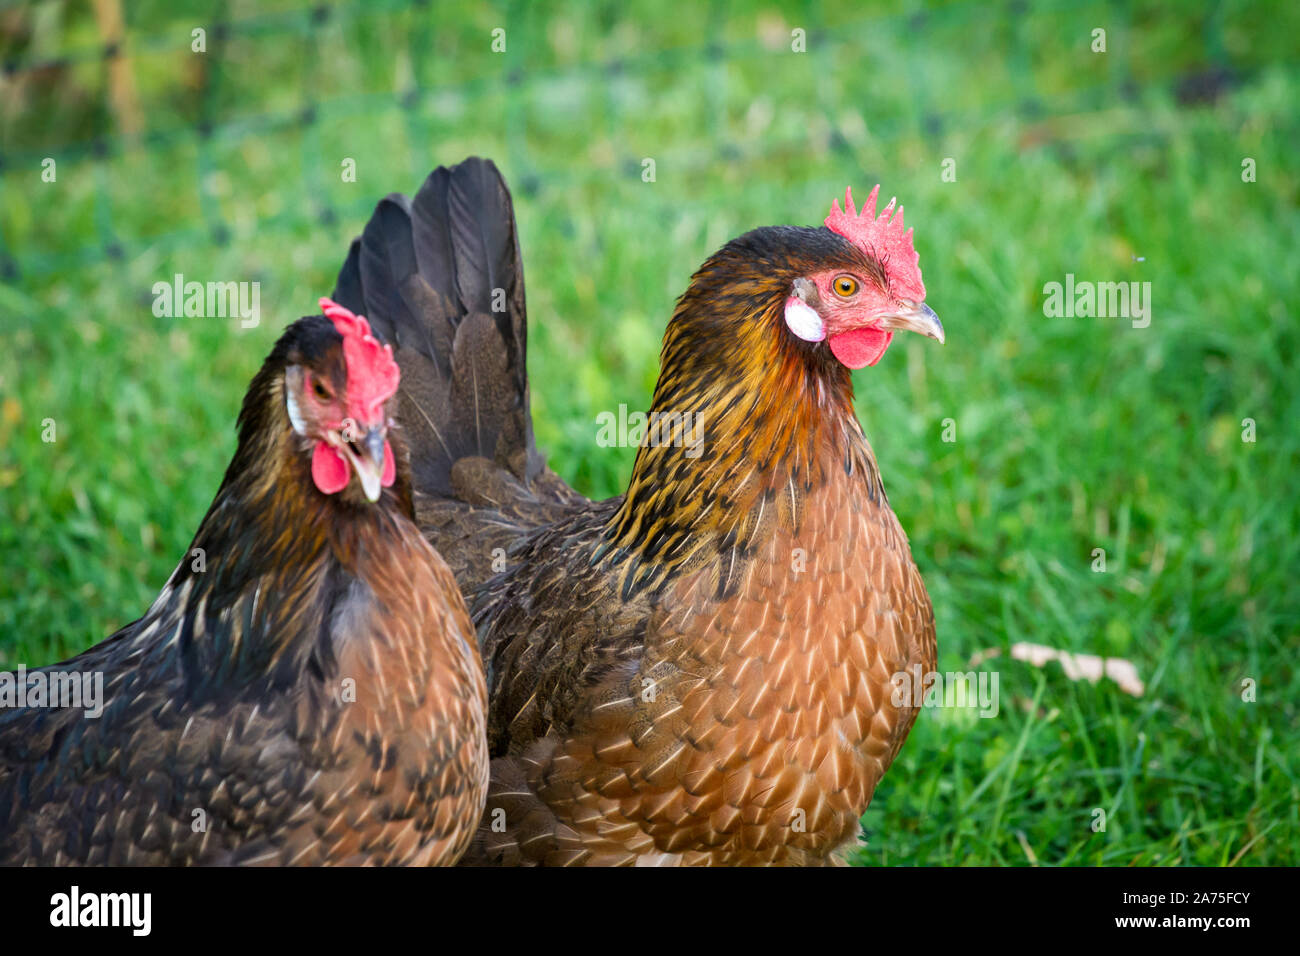 Proveis-Ultentaler chicken hens, a critically endangered chicken breed from South Tyrol Stock Photo